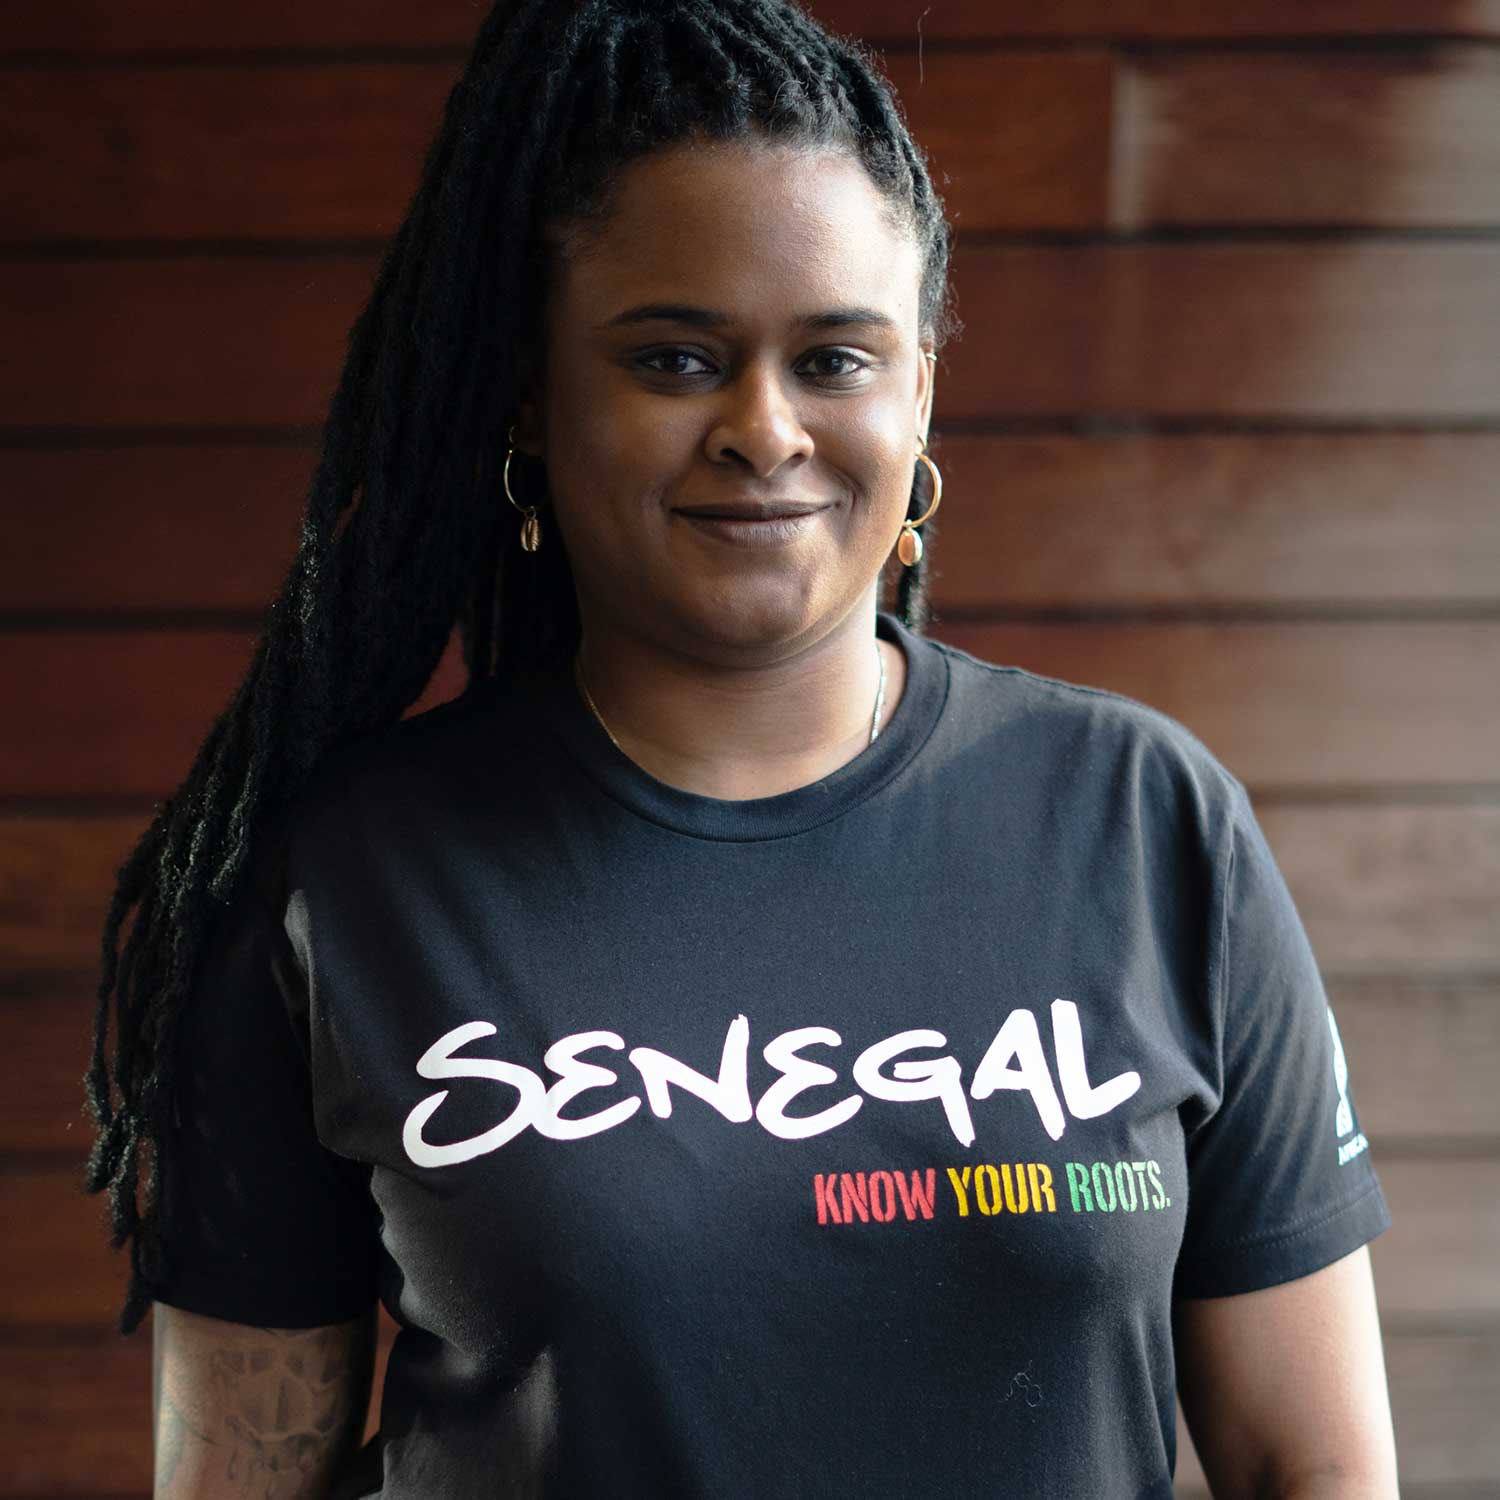 African American Woman wearing a black t-shirt with "Senegal" written in white and "Know Your Roots" written in African colors